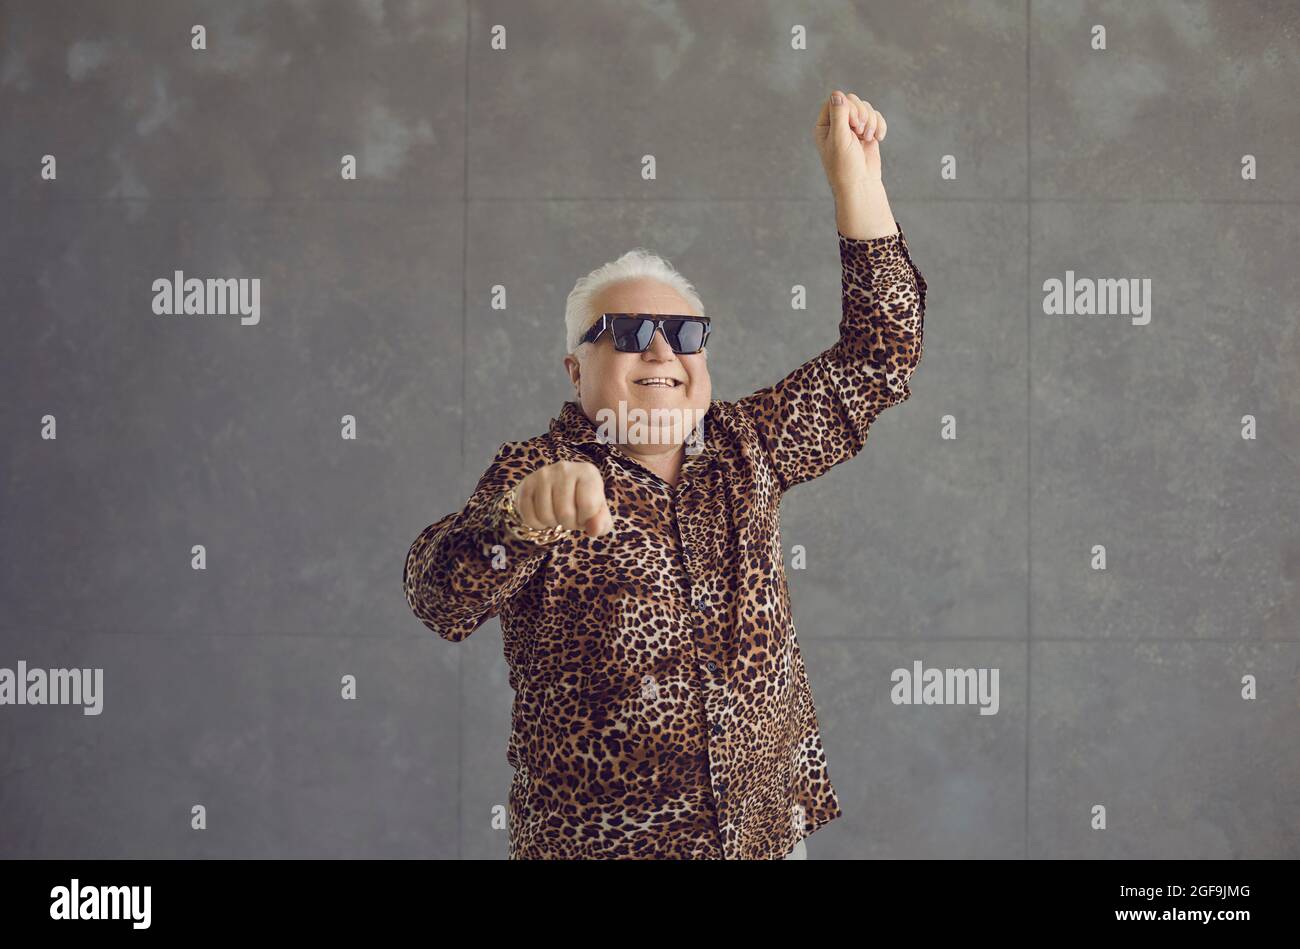 Portrait of funny senior man in leopard shirt and cool glasses dancing and having fun Stock Photo